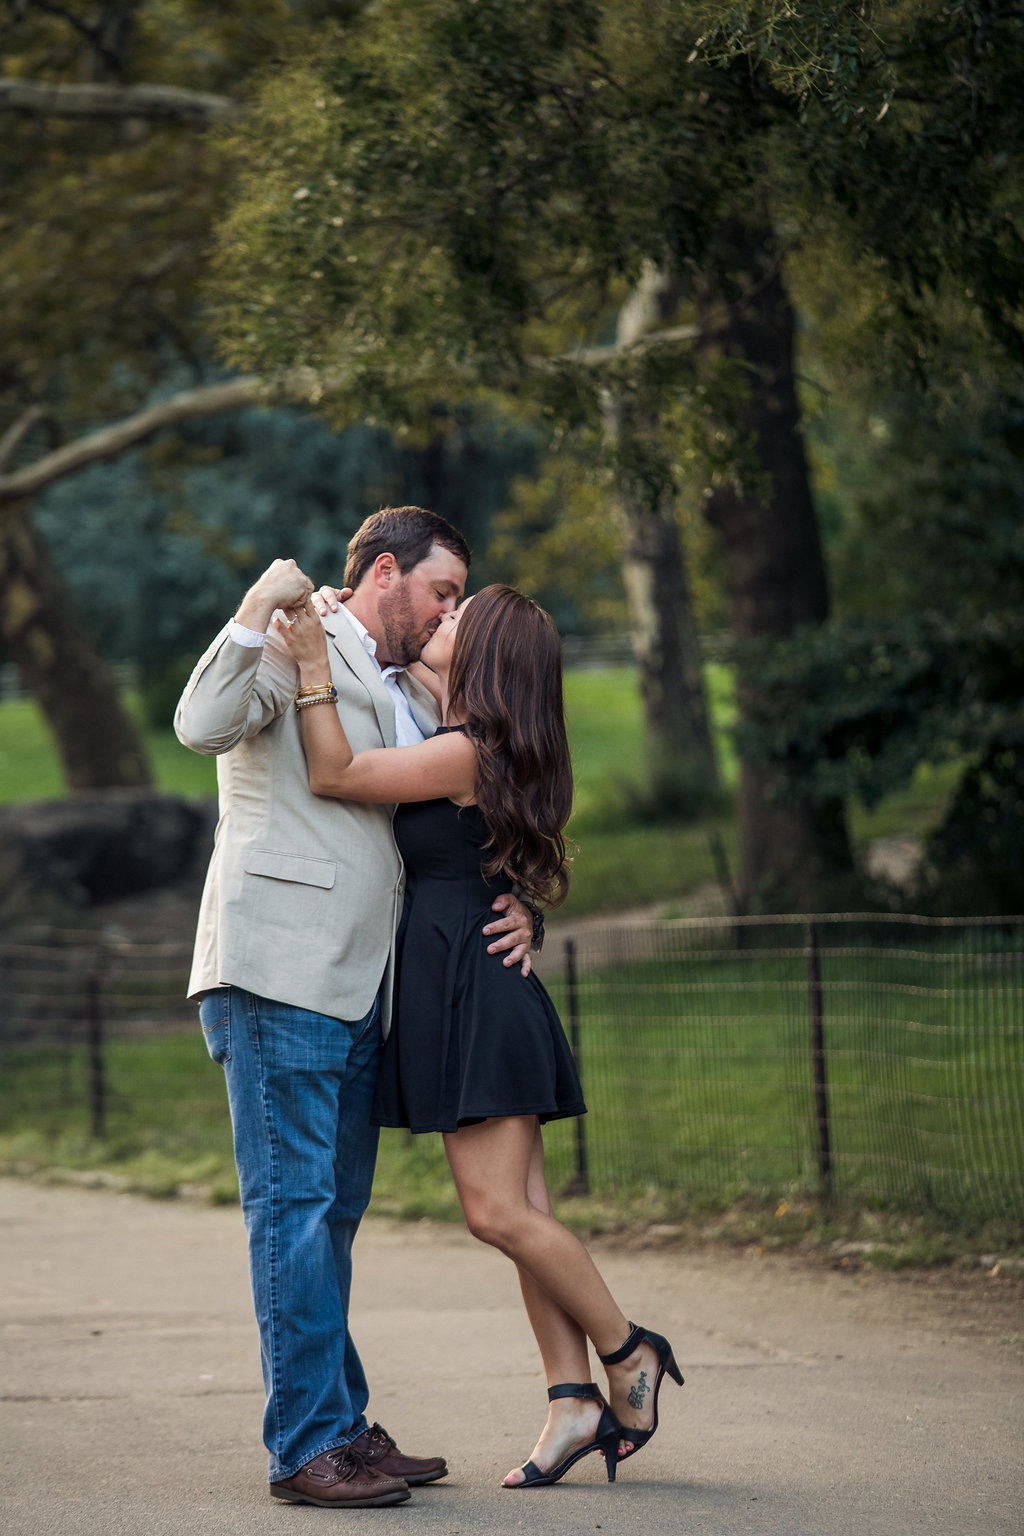 A Central Park Proposal - Ideas for Proposing to Girlfriends Daughter - Cory Lee Photography -- Wedding Blog - The Overwhelmed Bride